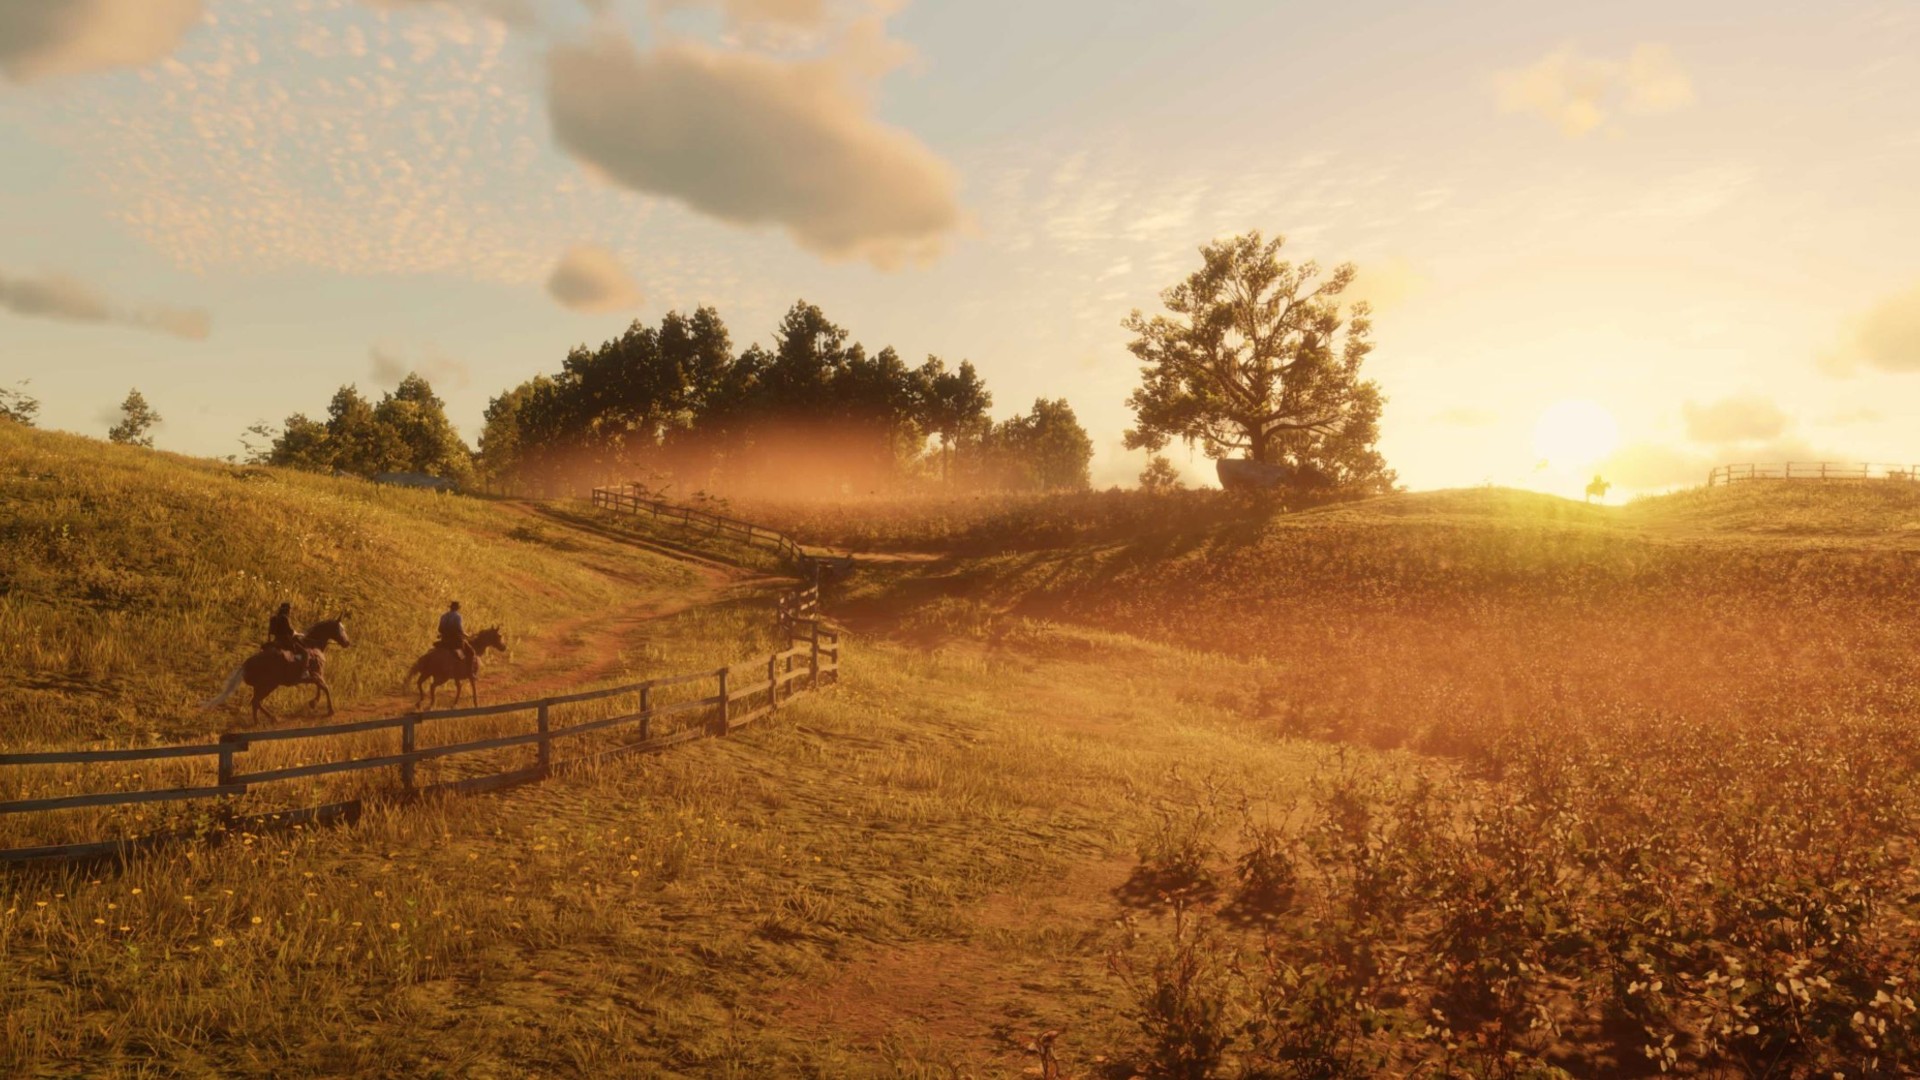 Red Dead Redemption 2 photo mode: how to take pictures in RDR2 | PCGamesN